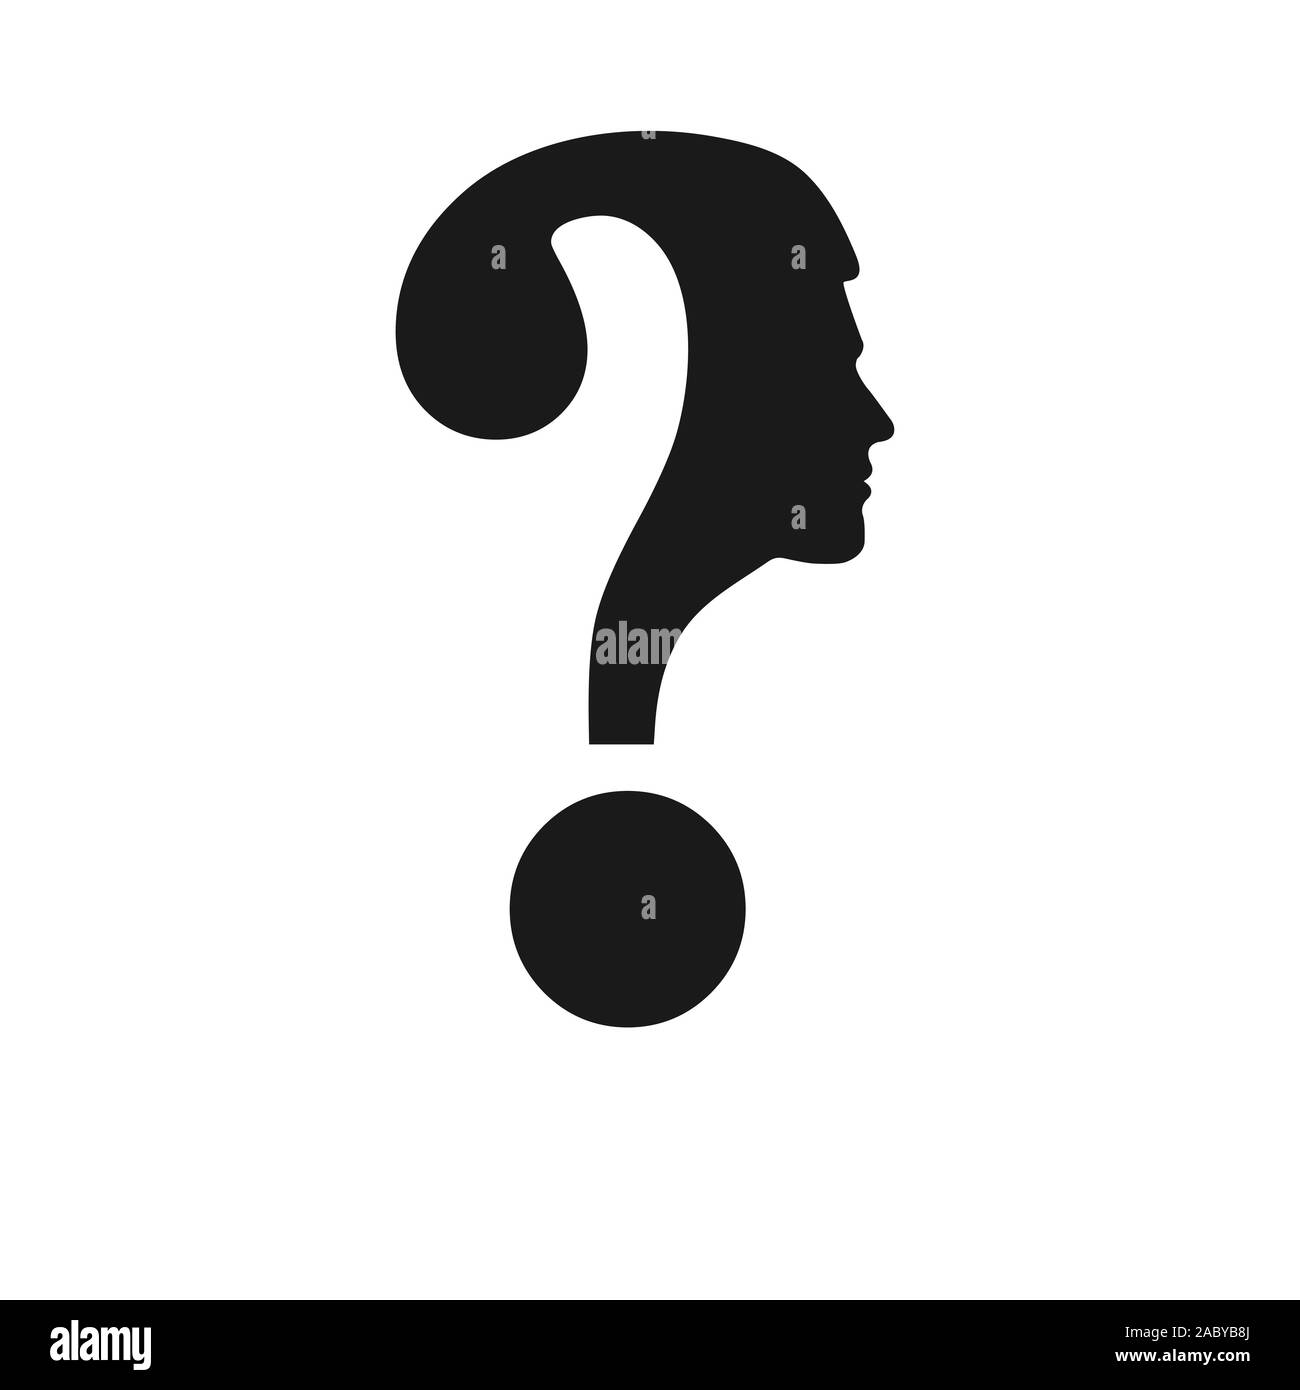 concept of thinking or doubting or finding solutions. Question mark combined with silhouette of male head, flat design for logo, website or app icon, Stock Vector